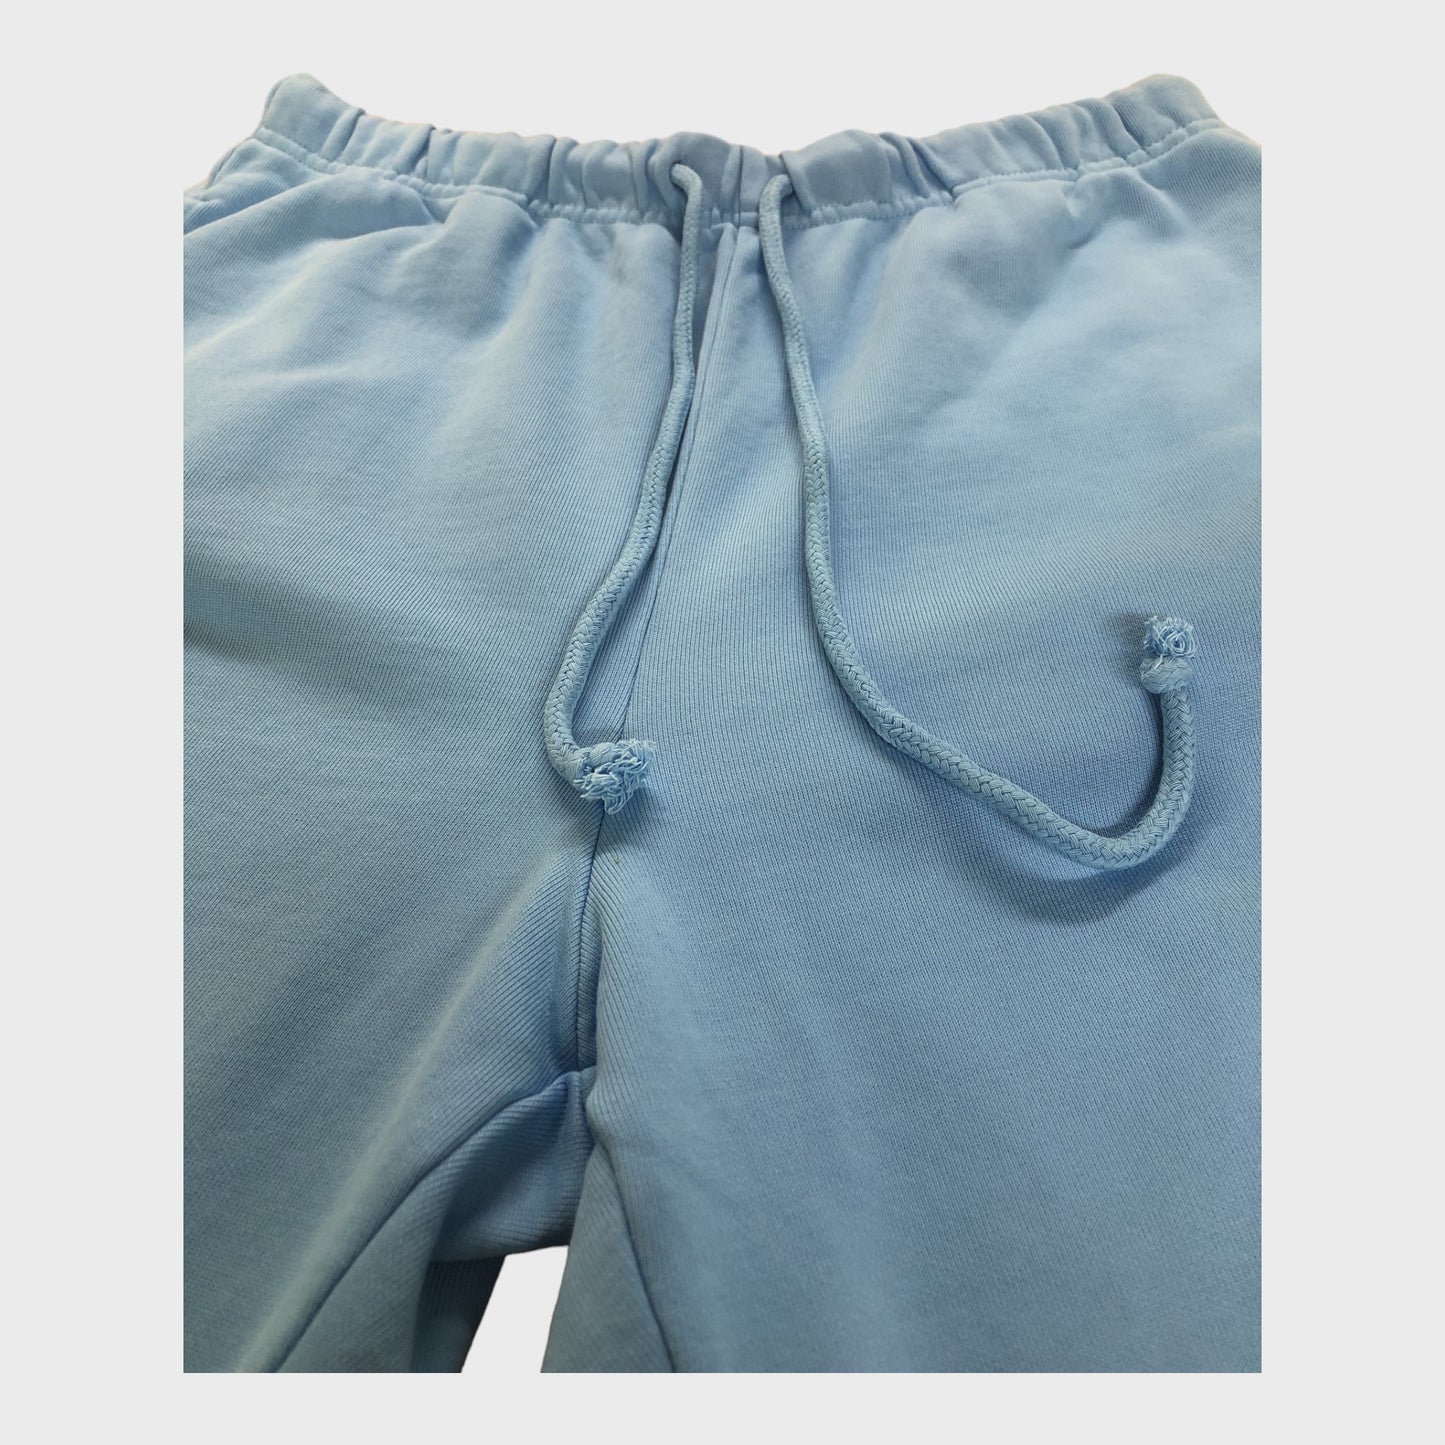 Branded Blue Joggers